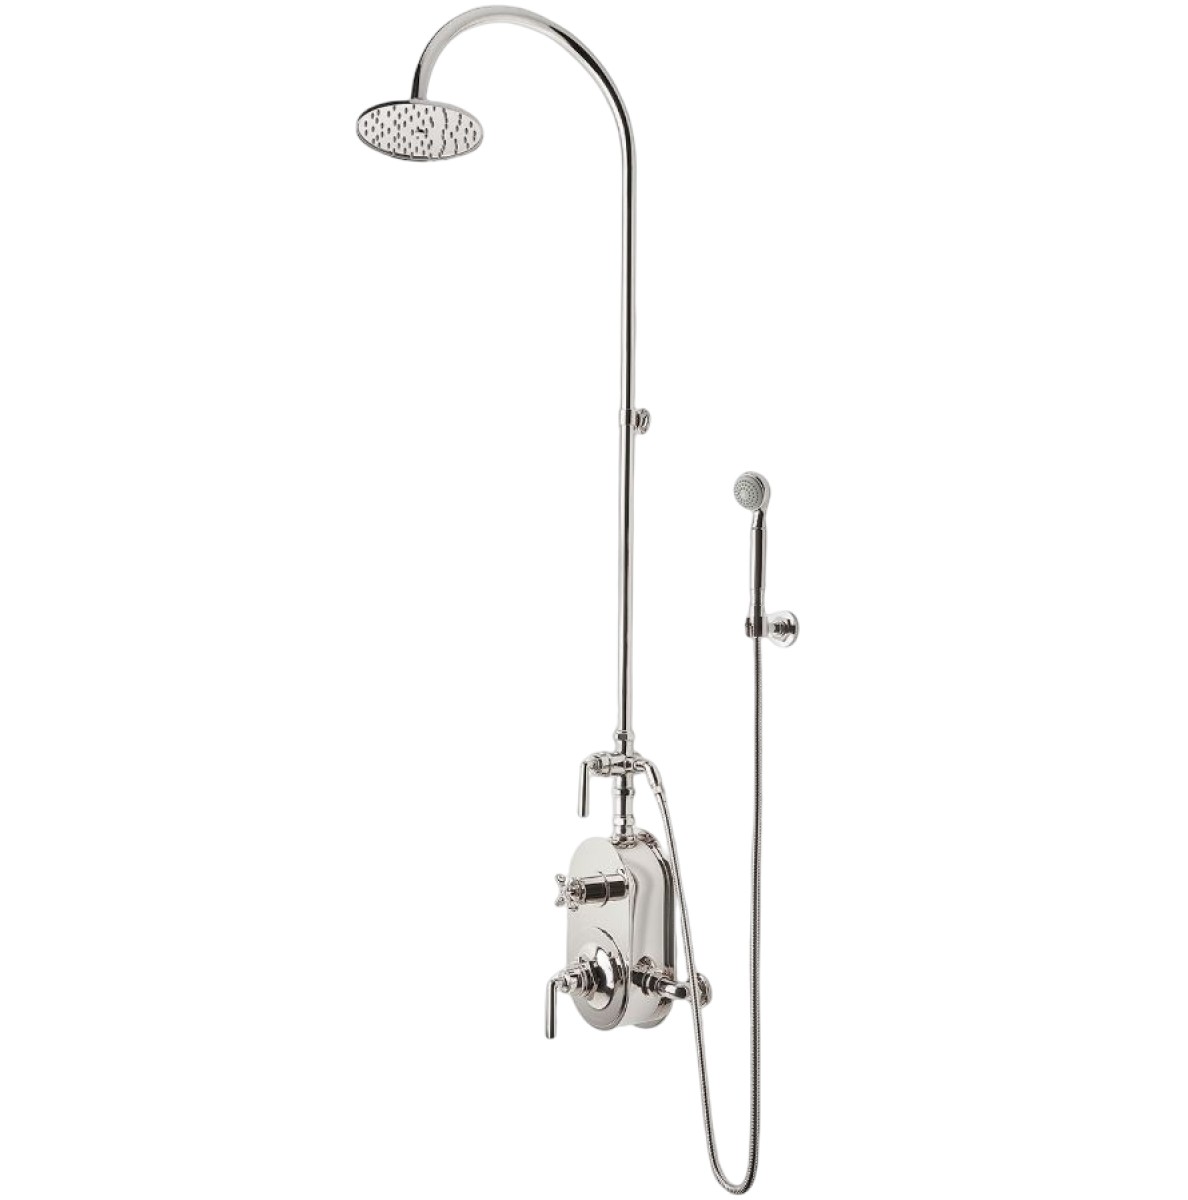 Discover Henry Exposed Thermostatic Shower System with 8 Shower Head,  Handshower, Metal Lever Diverter Handle, Metal Lever and Cross Handle  Online